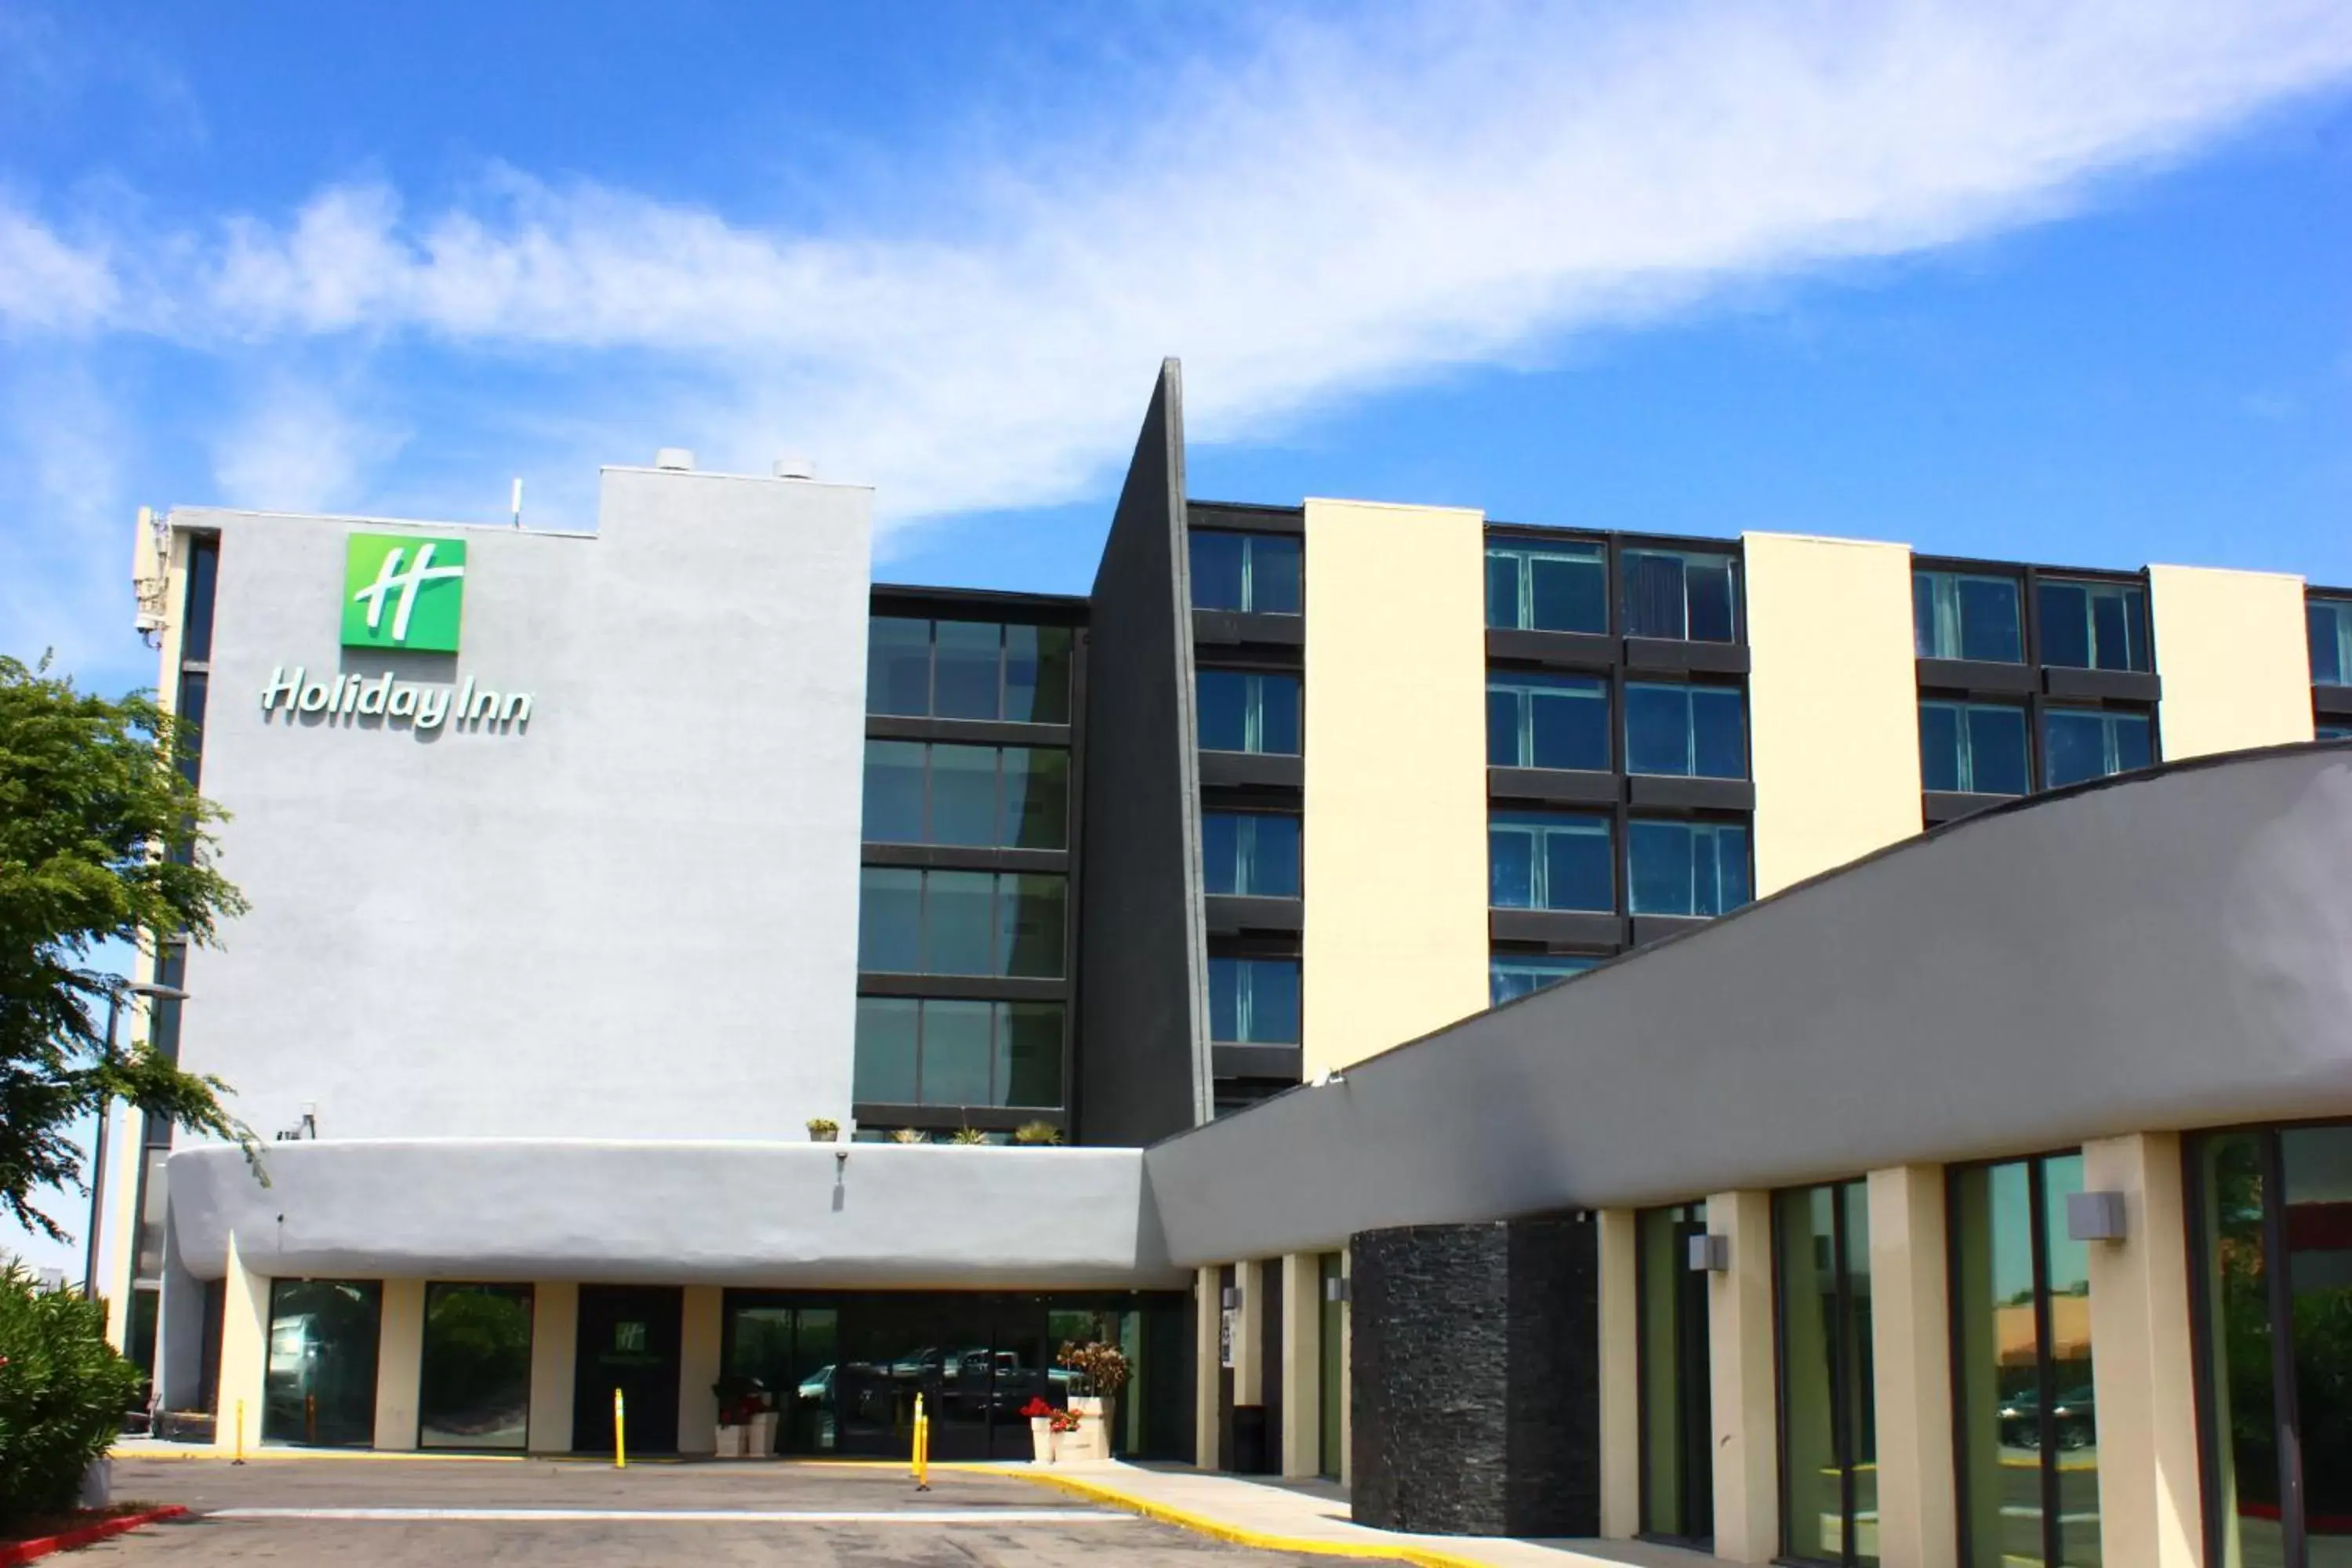 Property building in Holiday Inn Victorville, an IHG Hotel